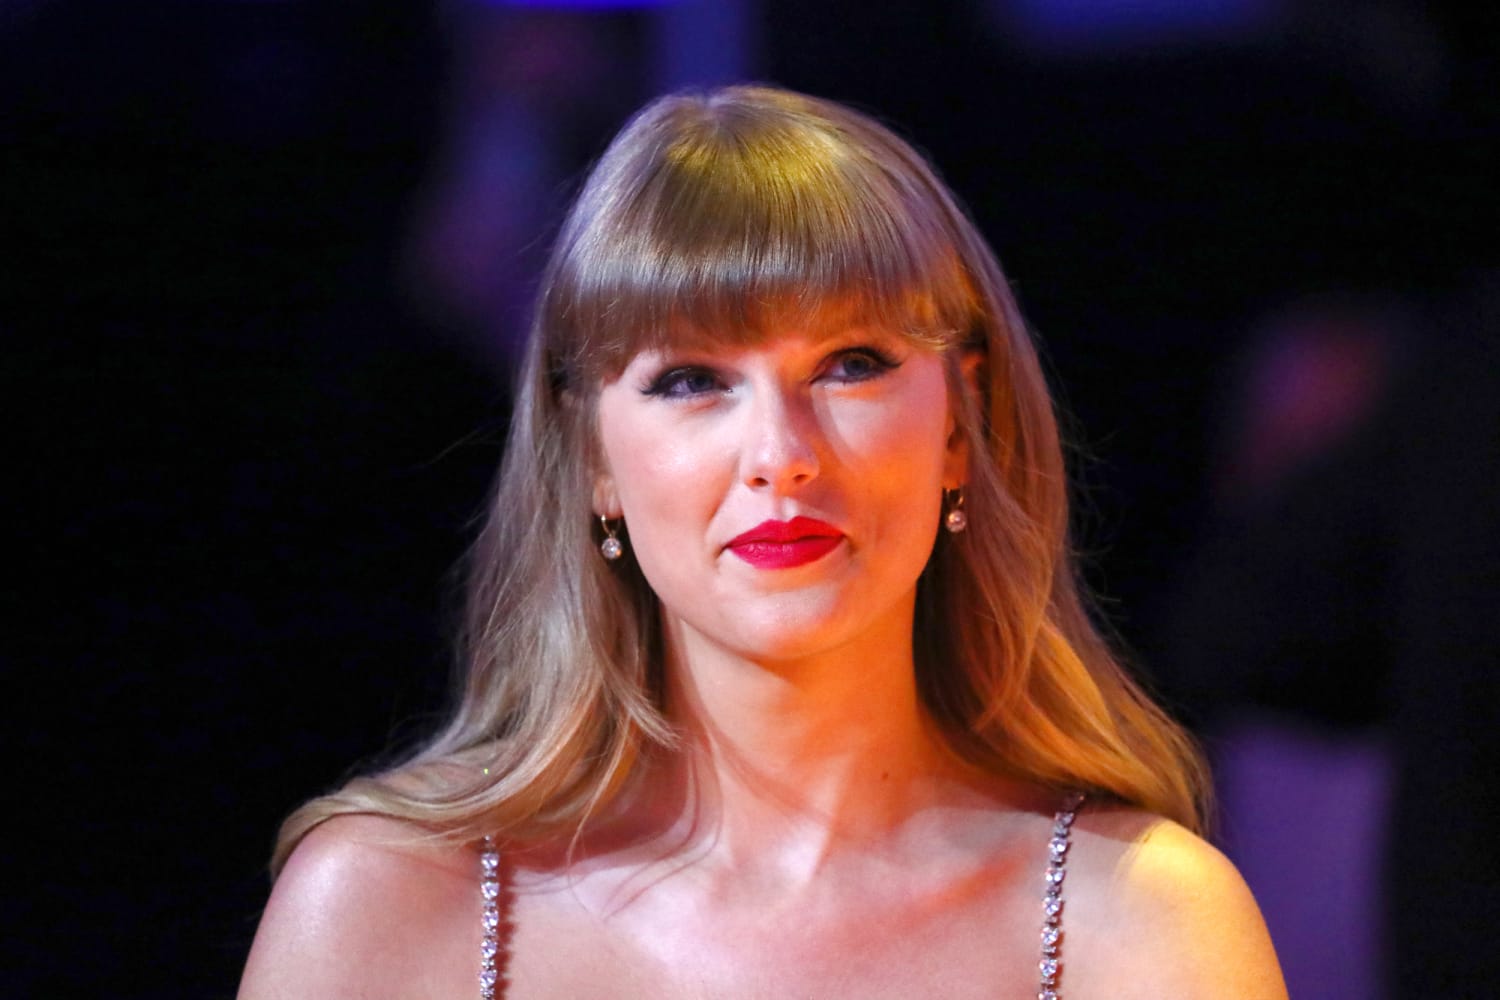 Taylor Swift album party becomes superspreader event after nearly 100 test positive for Covid